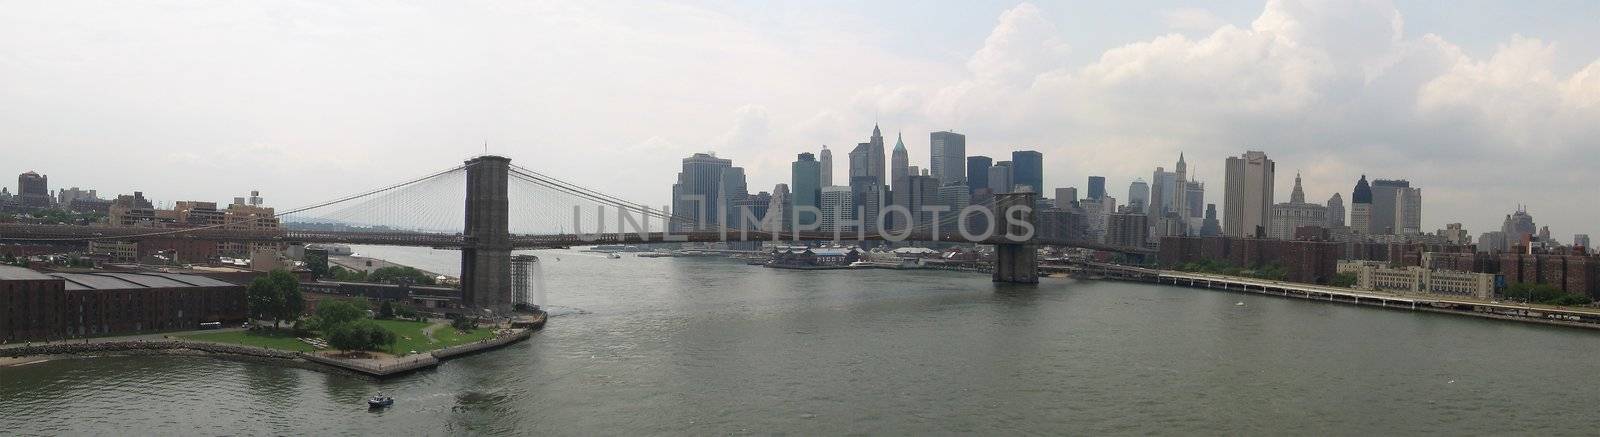 panoramic photo of brooklyn and lower manhattan, brooklyn bridge in the middle